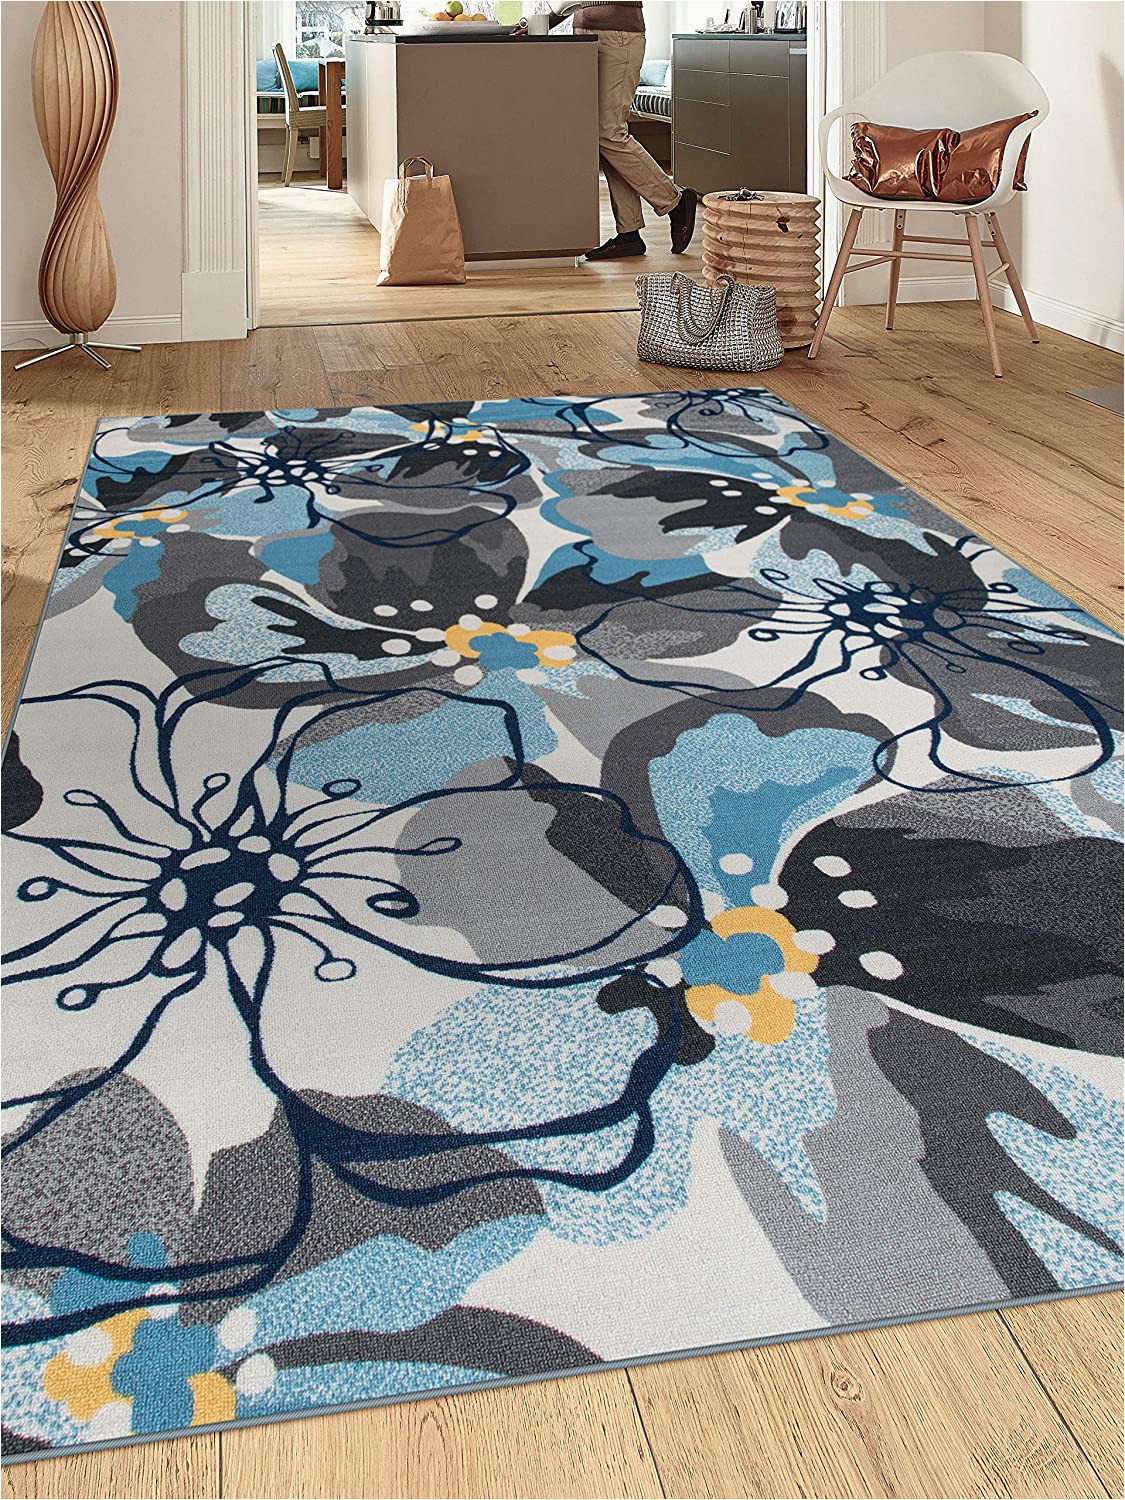 Turquoise and Brown area Rug 8×10 Modern Floral Non Slip Non Skid area Rug 8 X 10 7 10" X 10 Gray Blue